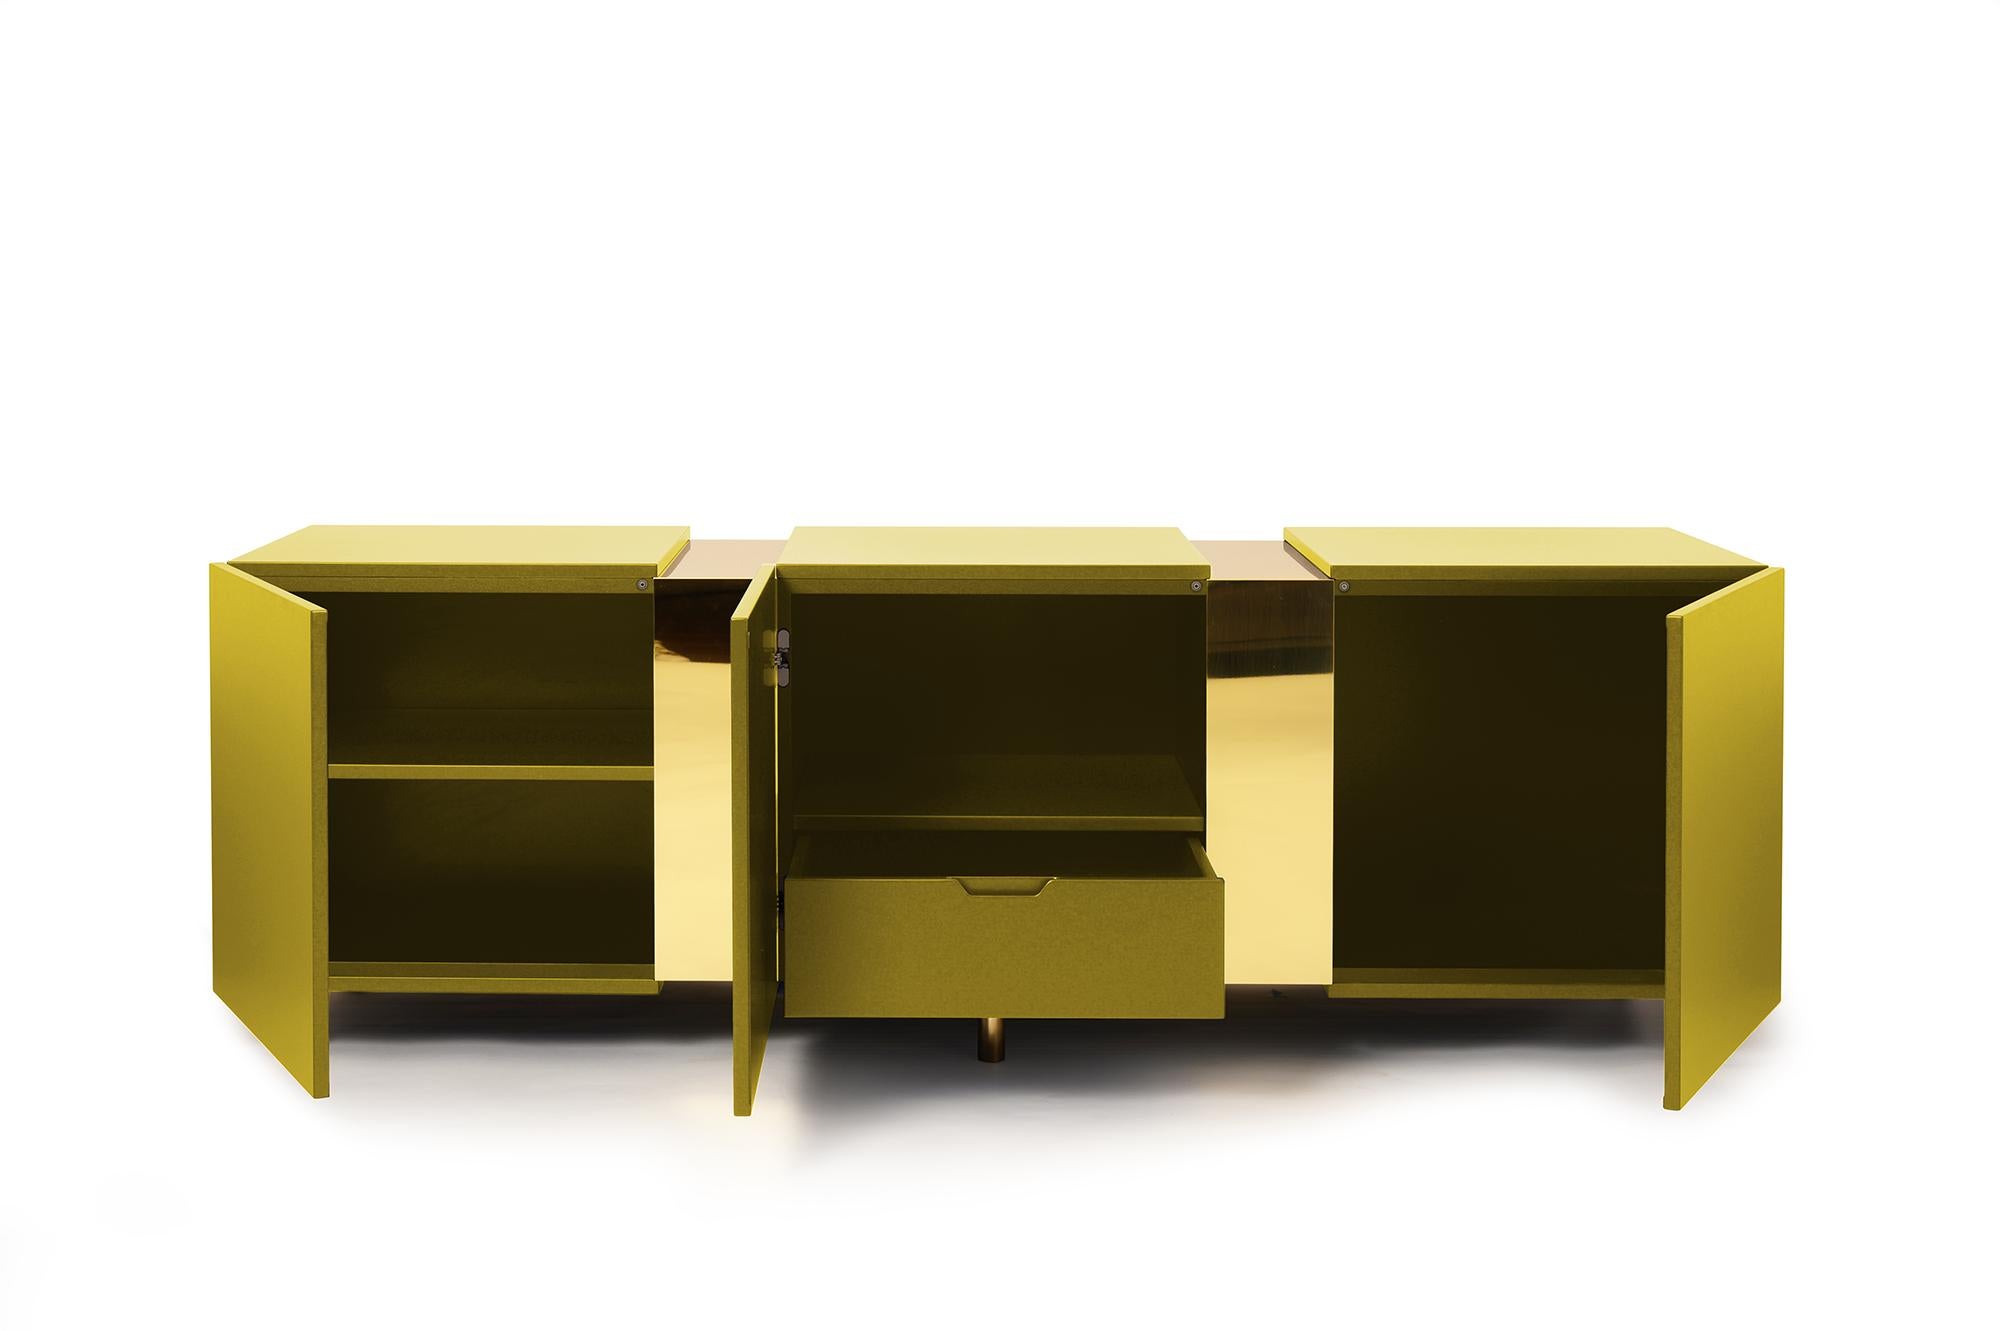 Eunduetrè is a low storage system which punctuates the space and plays with contrasting effects. Extremely simple in its geometric shapes, this sideboard/credenza alternates colorful cubes in matte lacquered wood, with sections of bent brass sheet